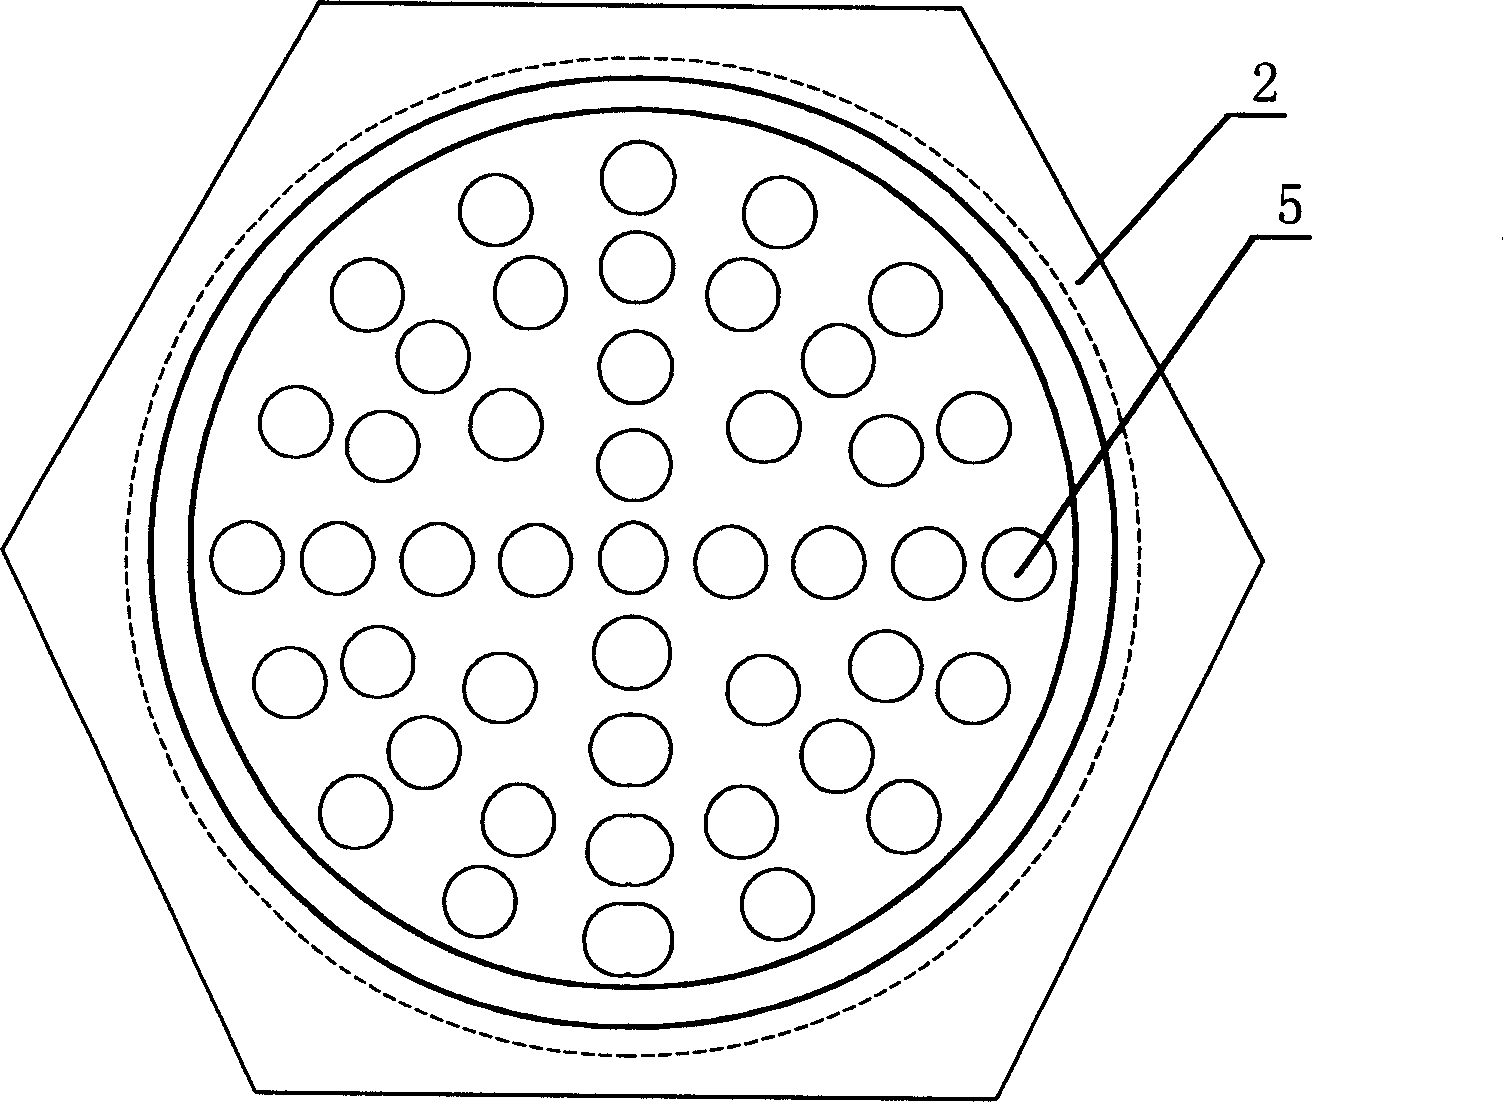 Ceramic hollow fiber membrane reactor for making oxygen by air separation, and its preparing method and use